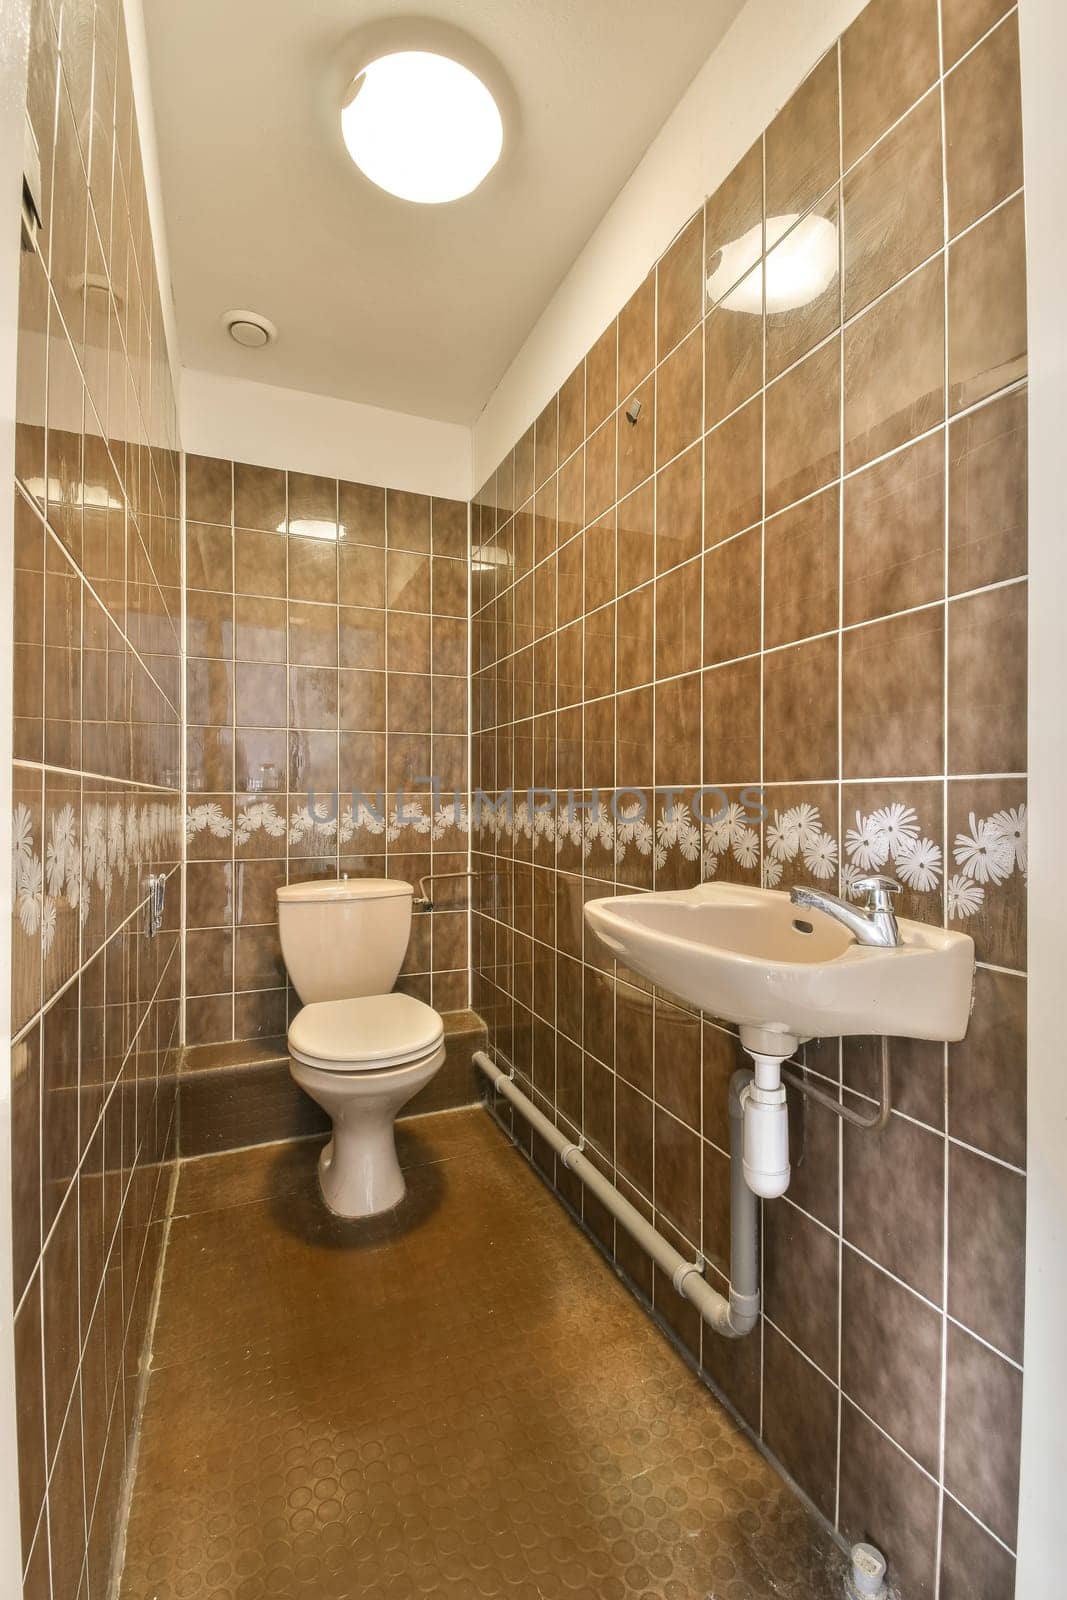 a bathroom with brown tiles on the walls and white fixtures in the sink is next to the toilet, which has been used for